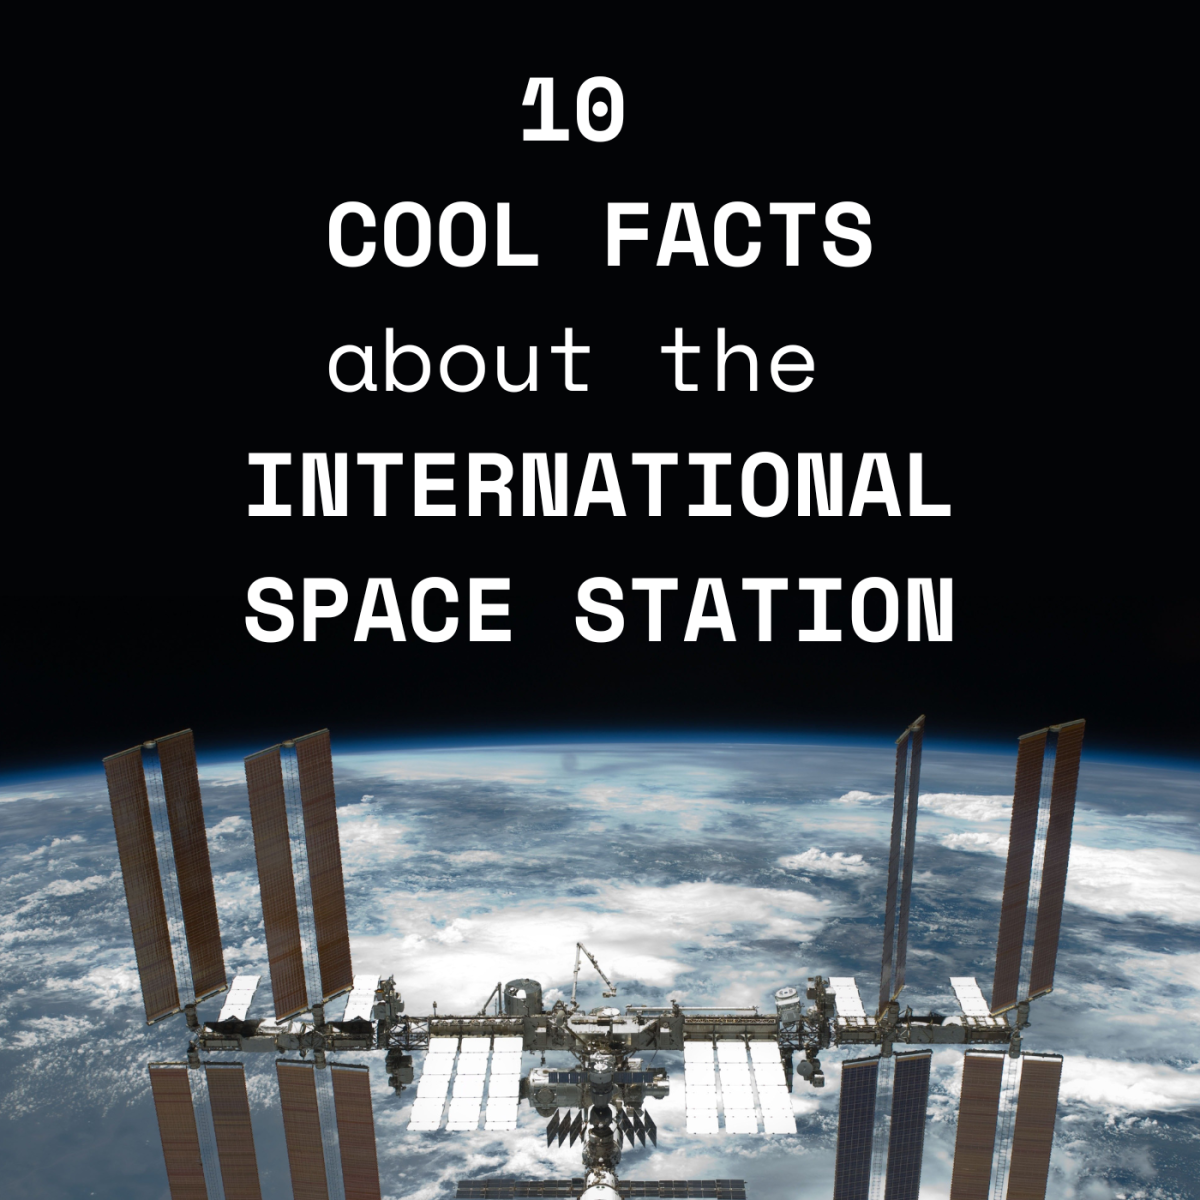 10 Unusual Facts About the International Space Station - Owlcation